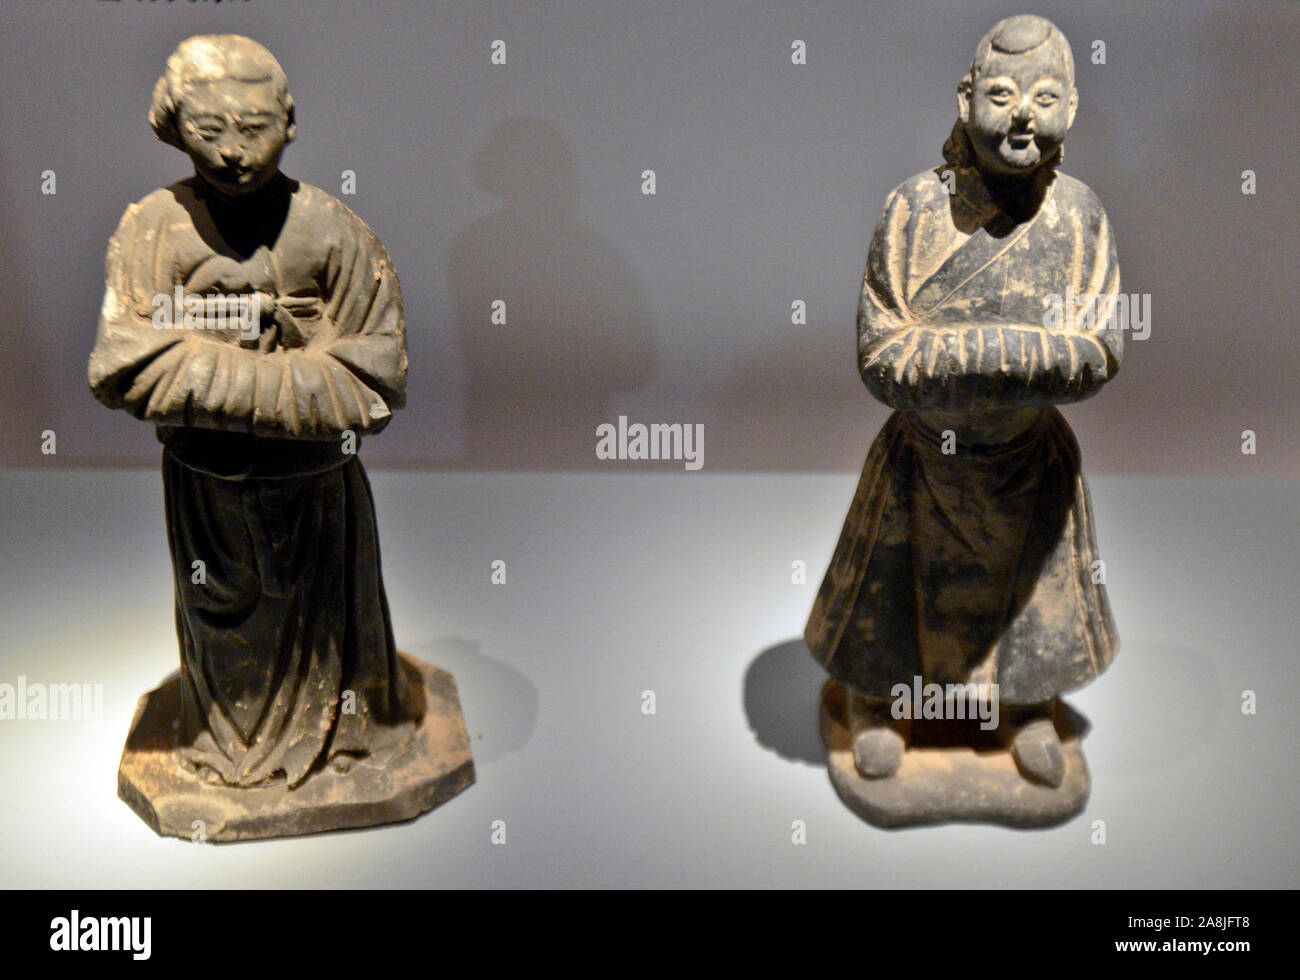 Statues mongoles. Ordos Mongol Art Wuhan Museum, Chine Banque D'Images